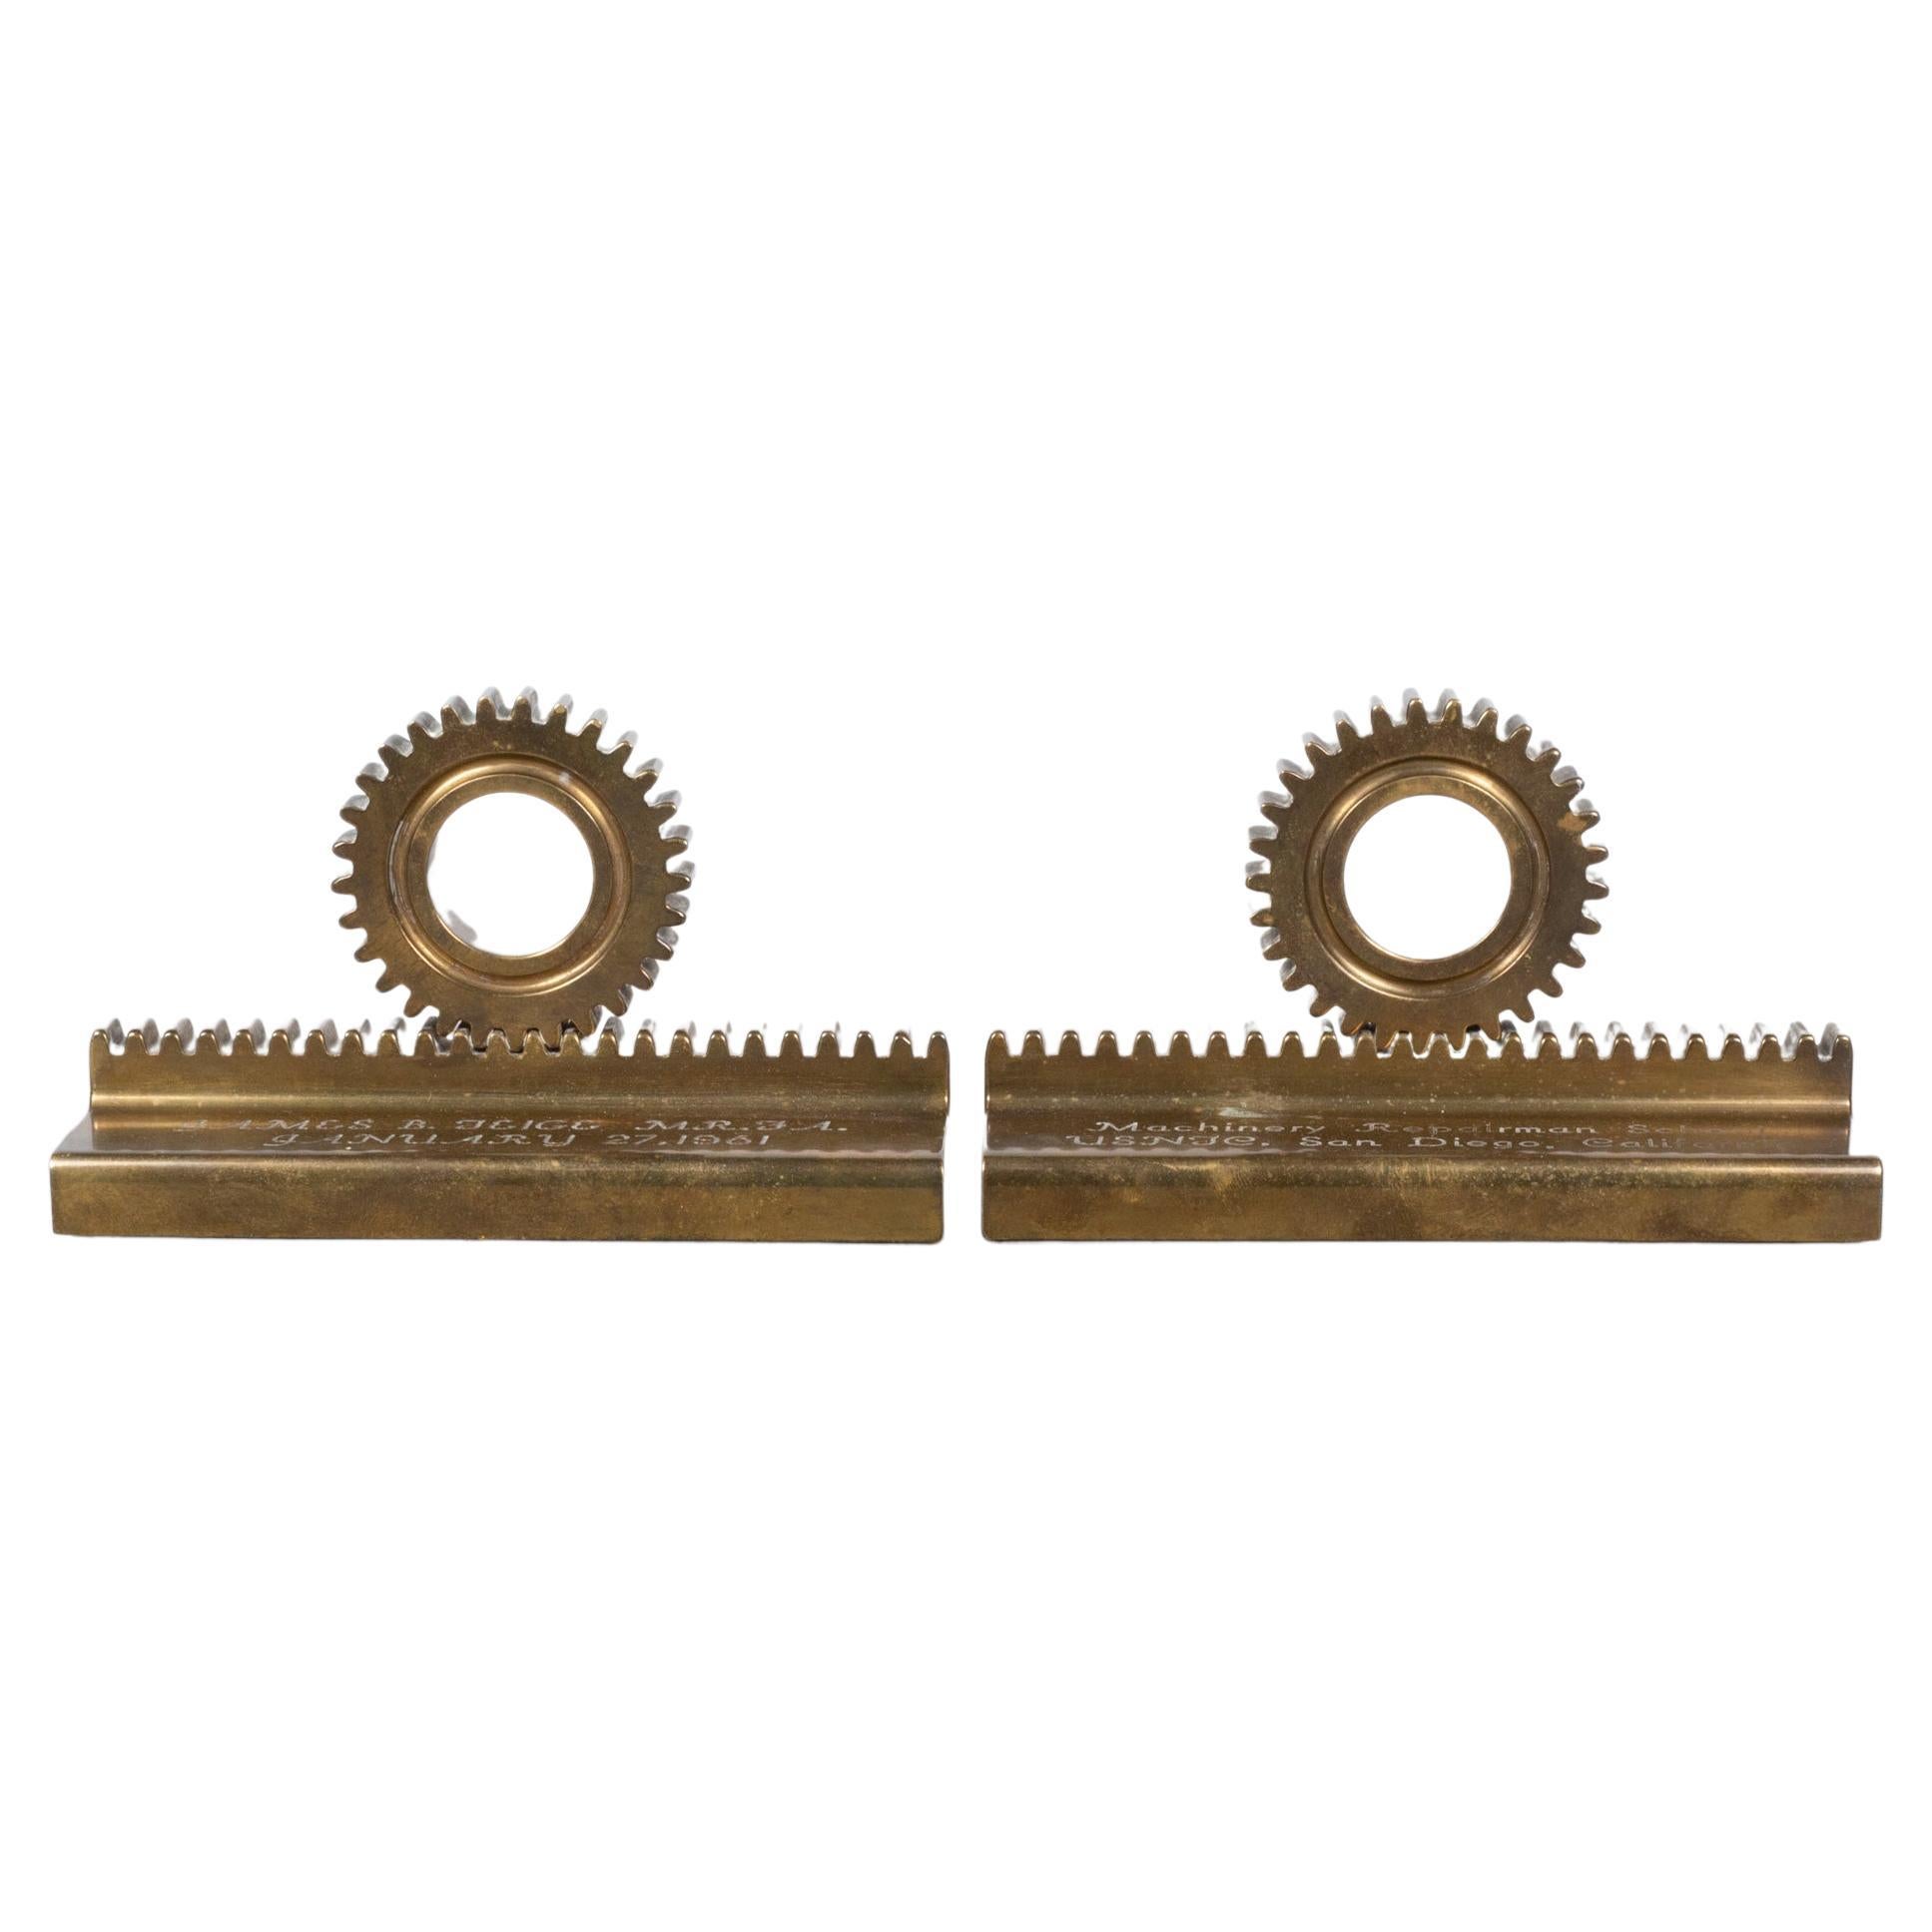 Midcentury Engraved Solid Bronze Gear Bookends, circa 1961